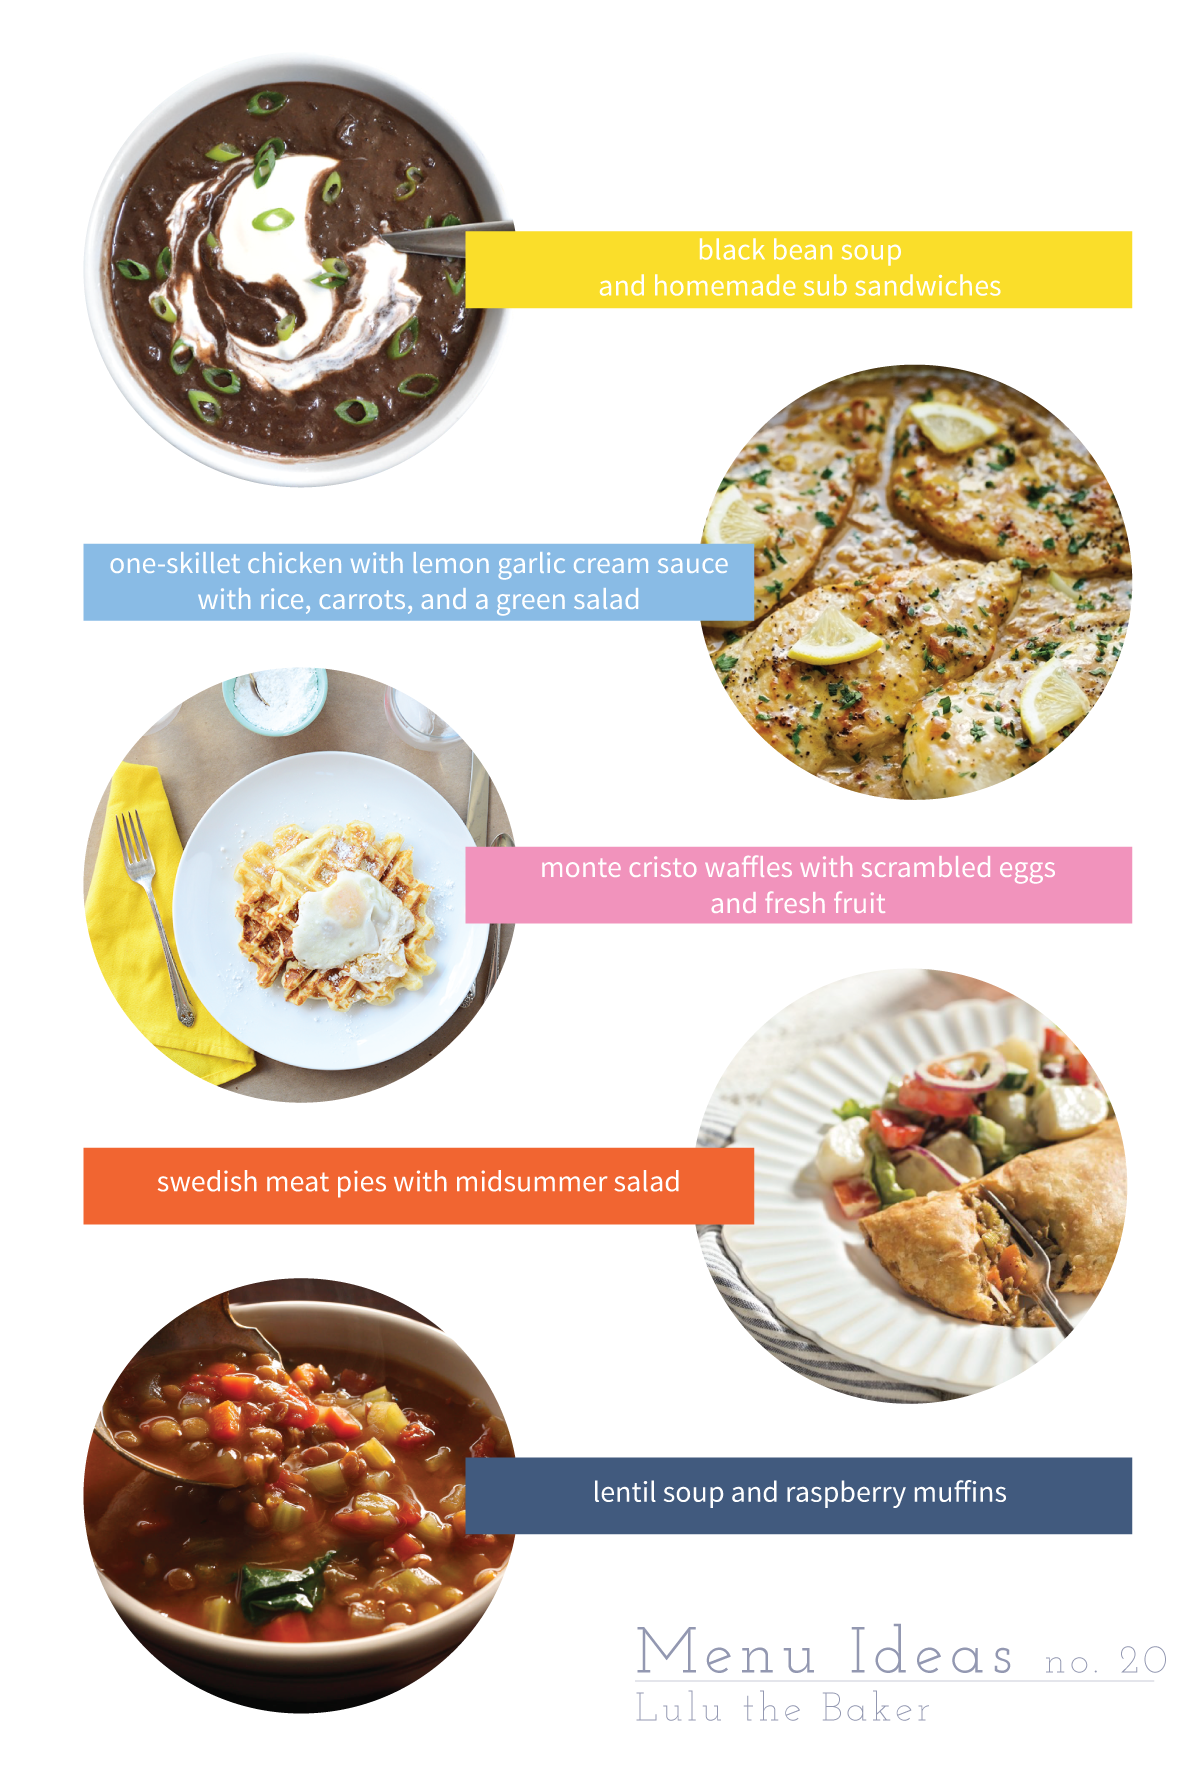 5 menu ideas for fast, family-friendly dinners you can make on even the busiest weeknights!